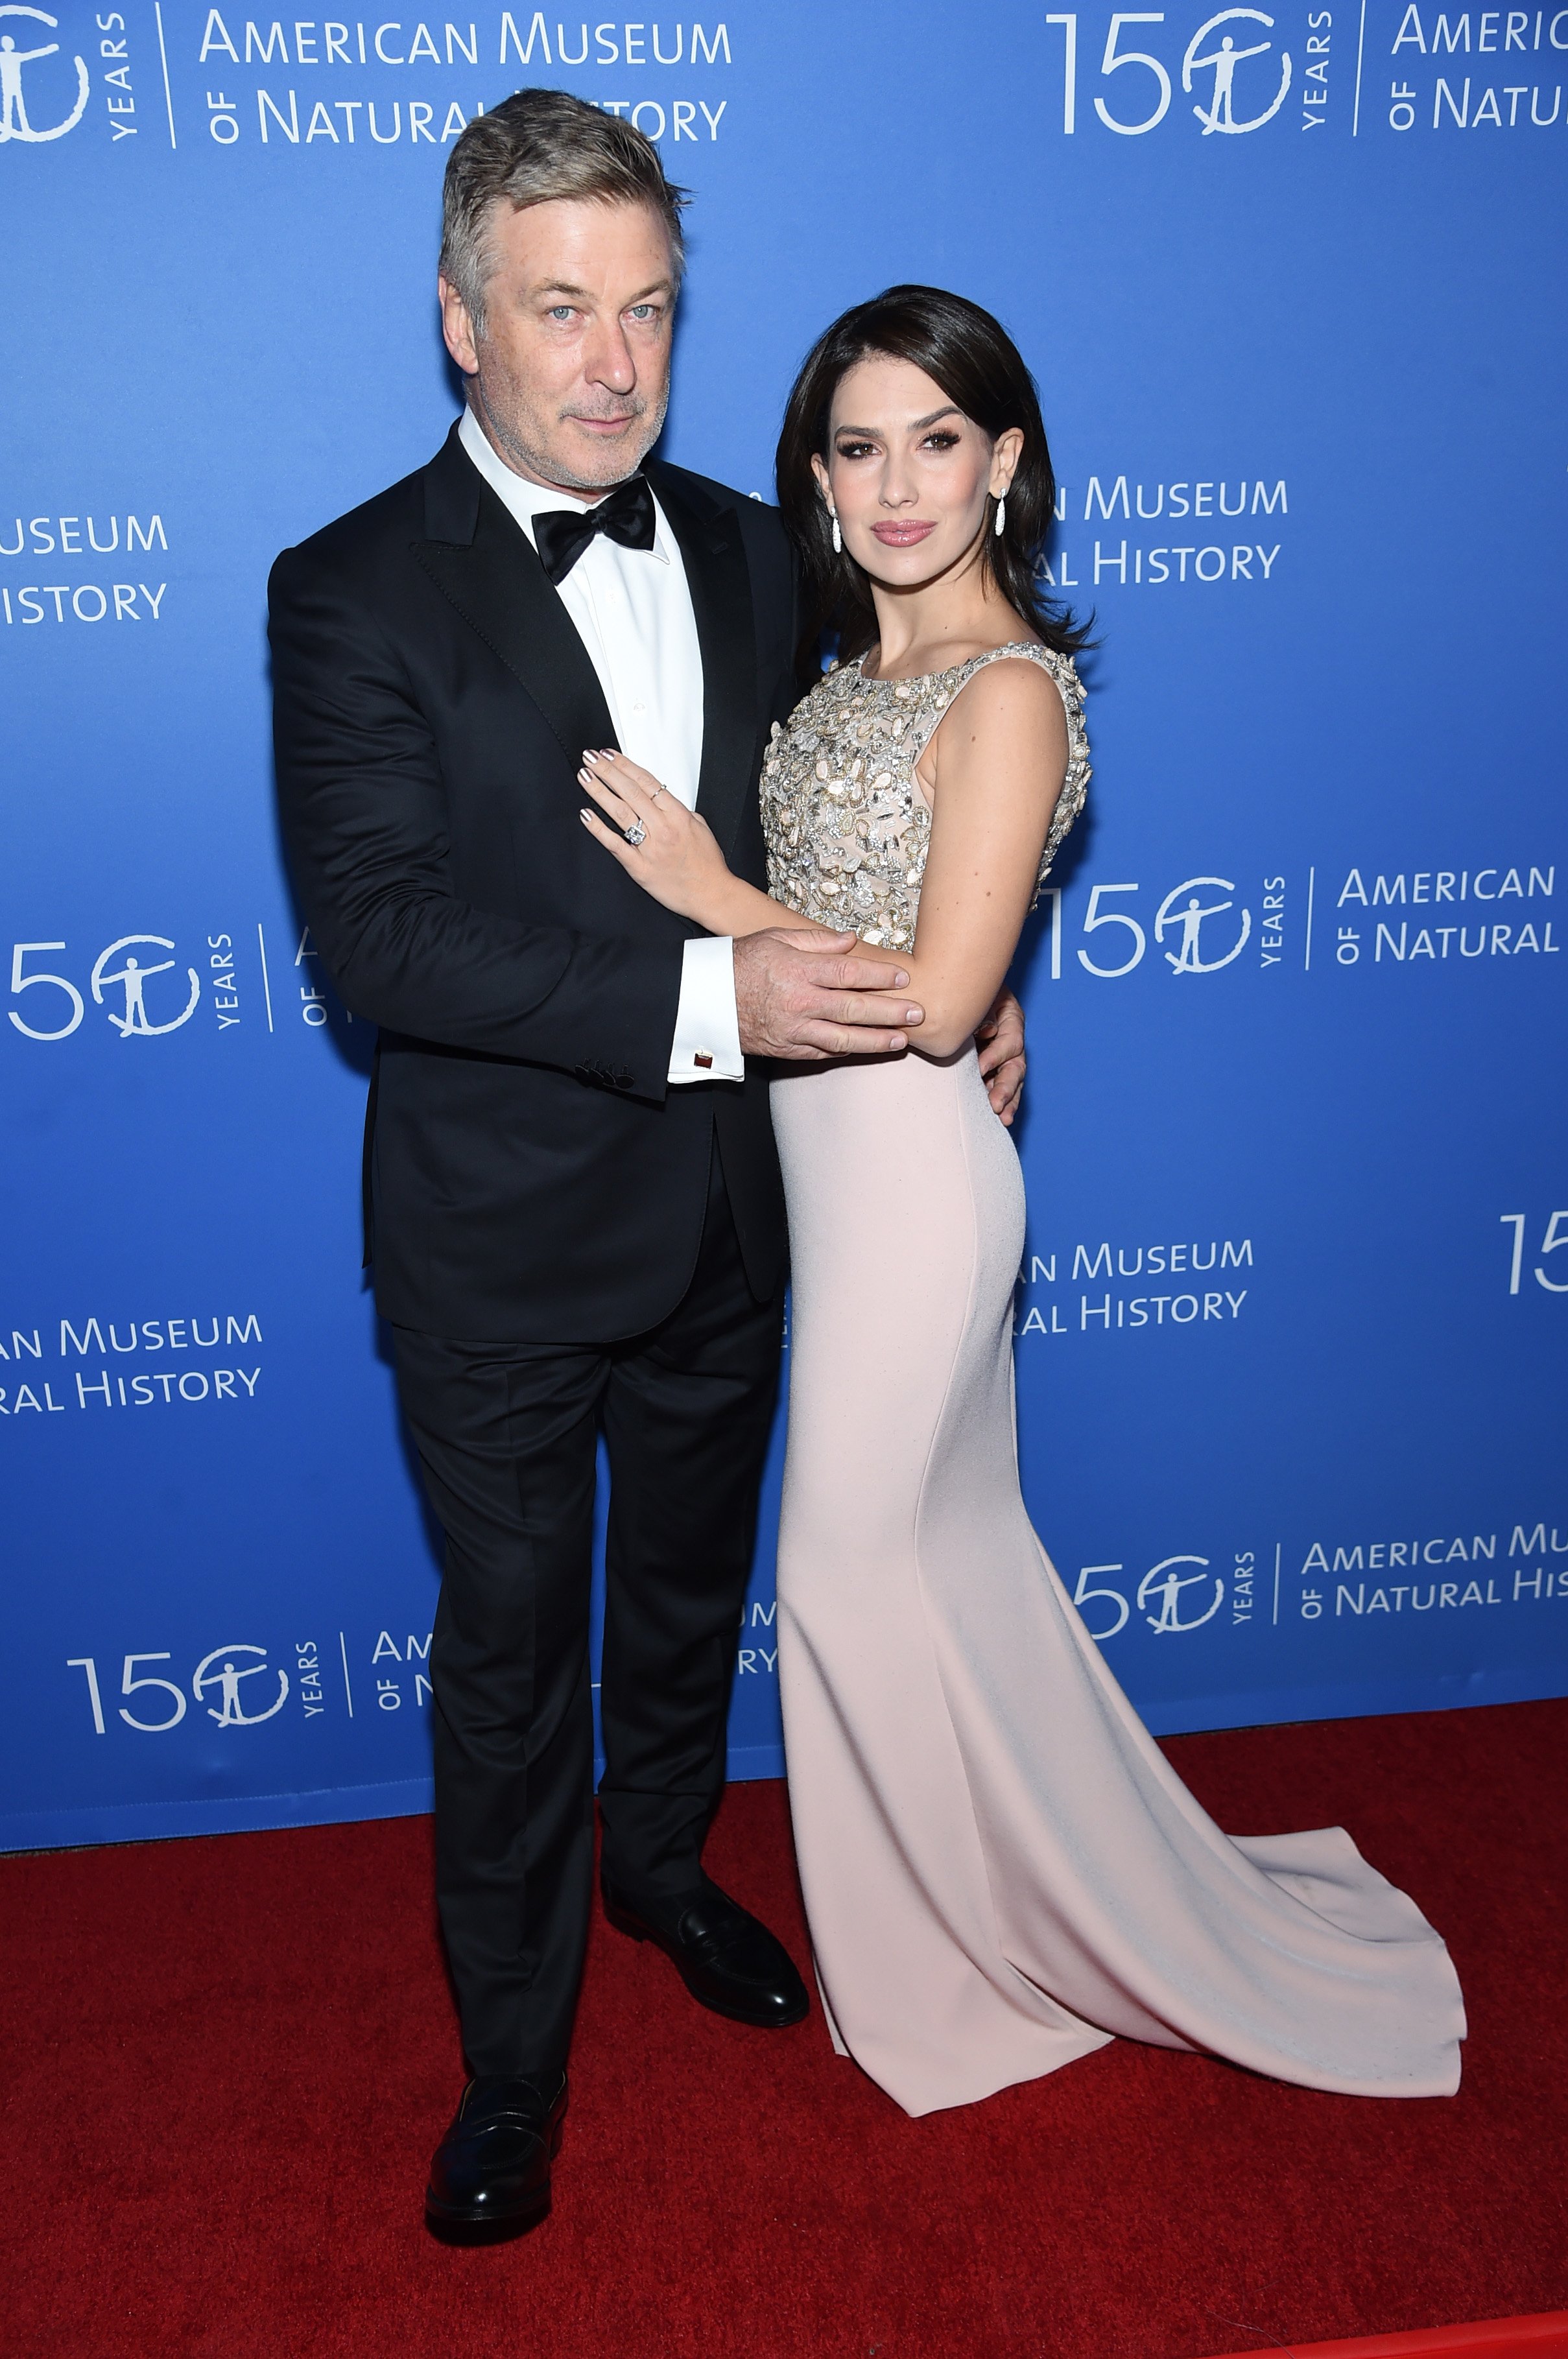 Alec Baldwin and Hilaria Baldwin attend the American Museum Of Natural History 2019 Gala at the American Museum of Natural History on November 21, 2019, in New York City. | Source: Getty Images.